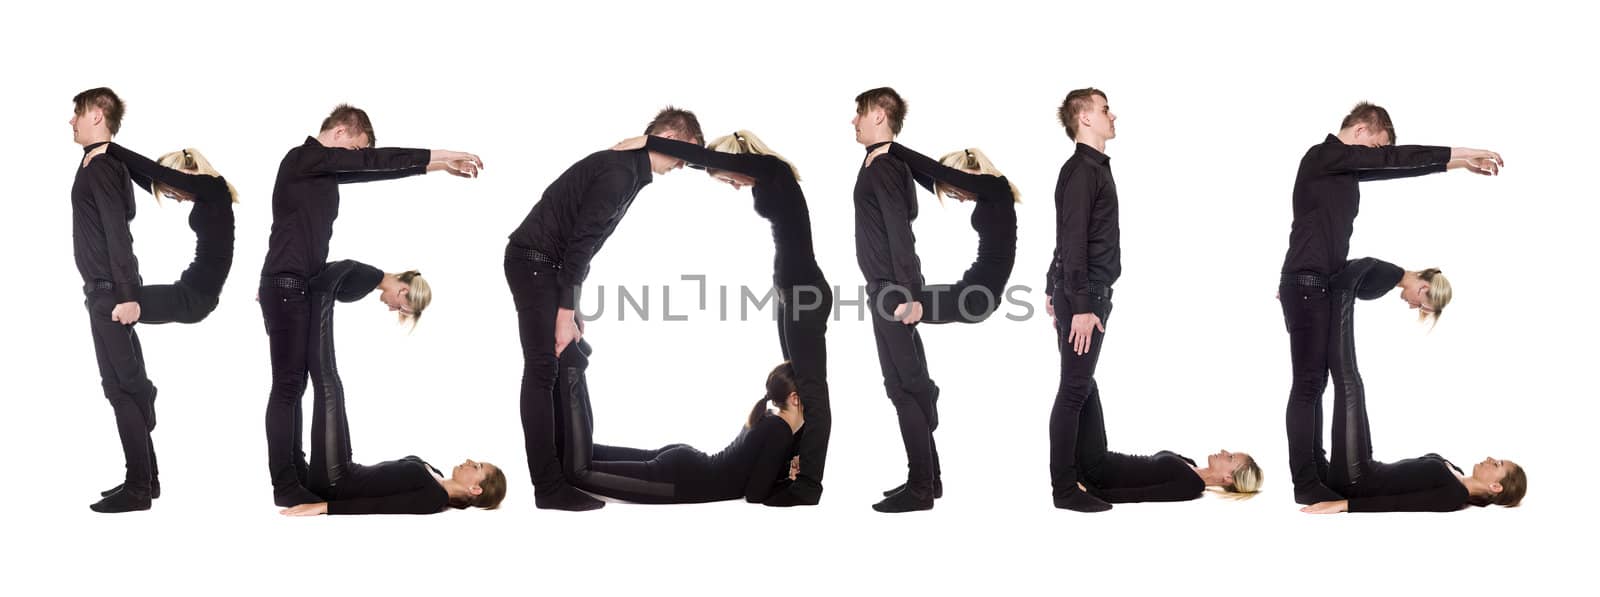 Group of people forming the word 'PEOPLE', isolated on white background.